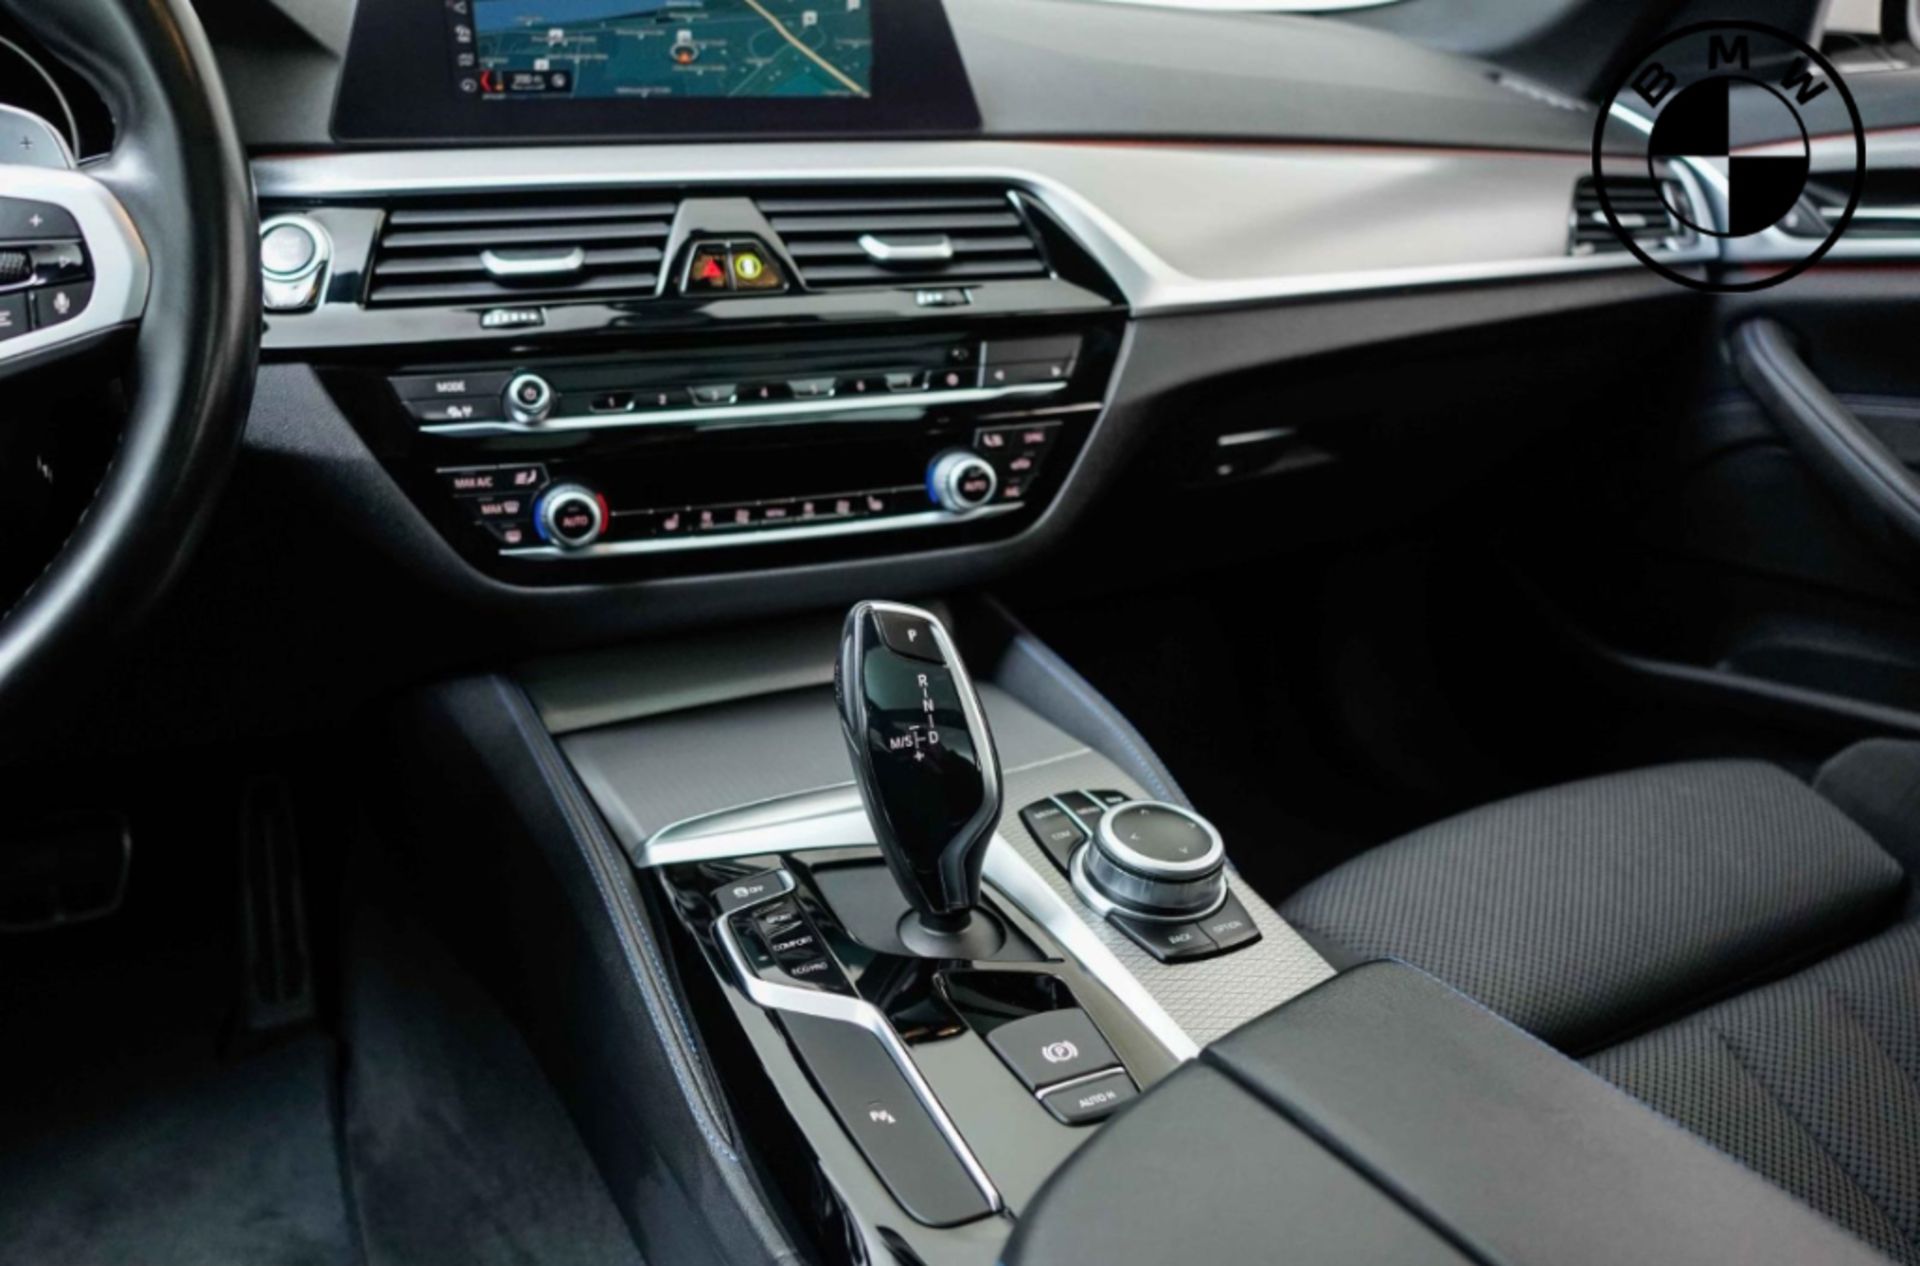 BMW 520d Touring - Image 6 of 9